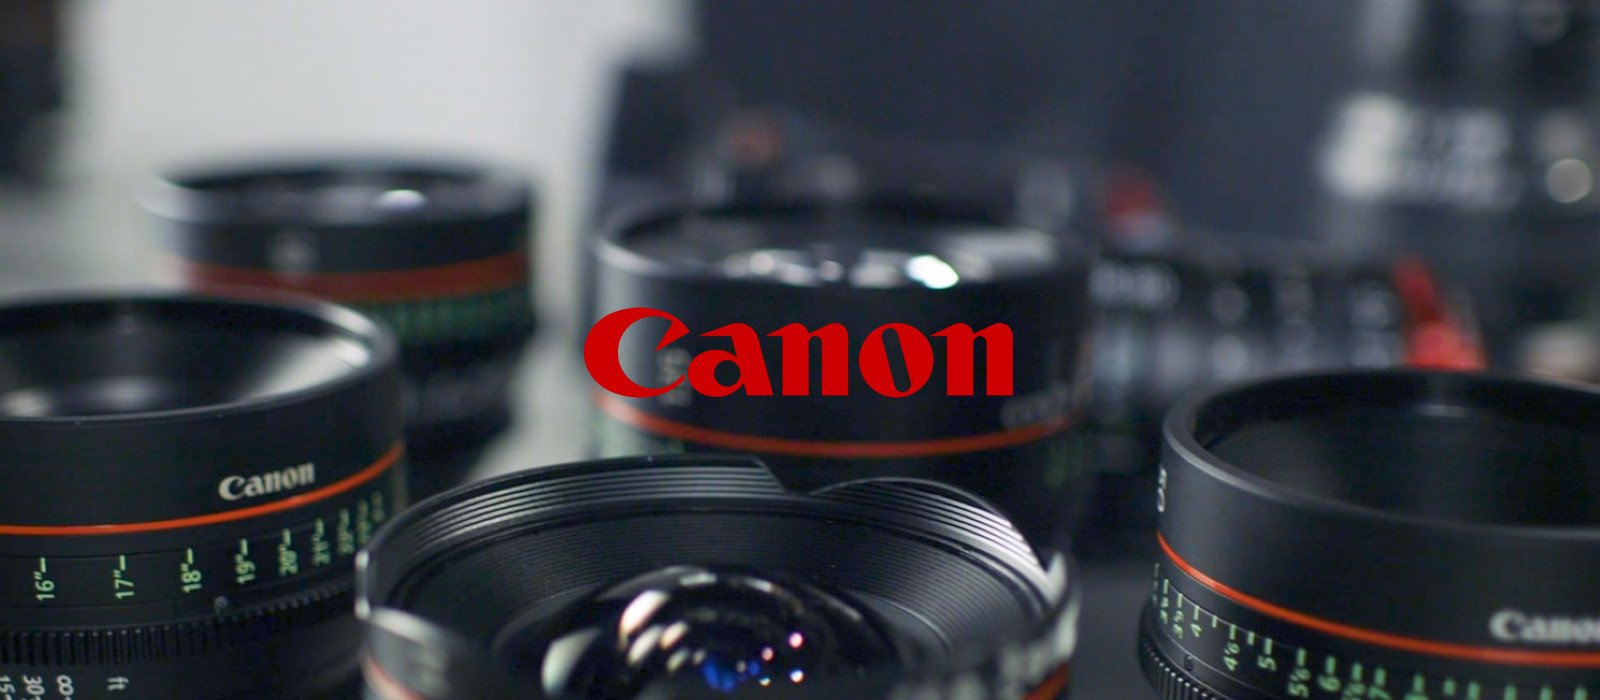 Canon hit by Maze Ransomware attack, 10TB data allegedly stolen